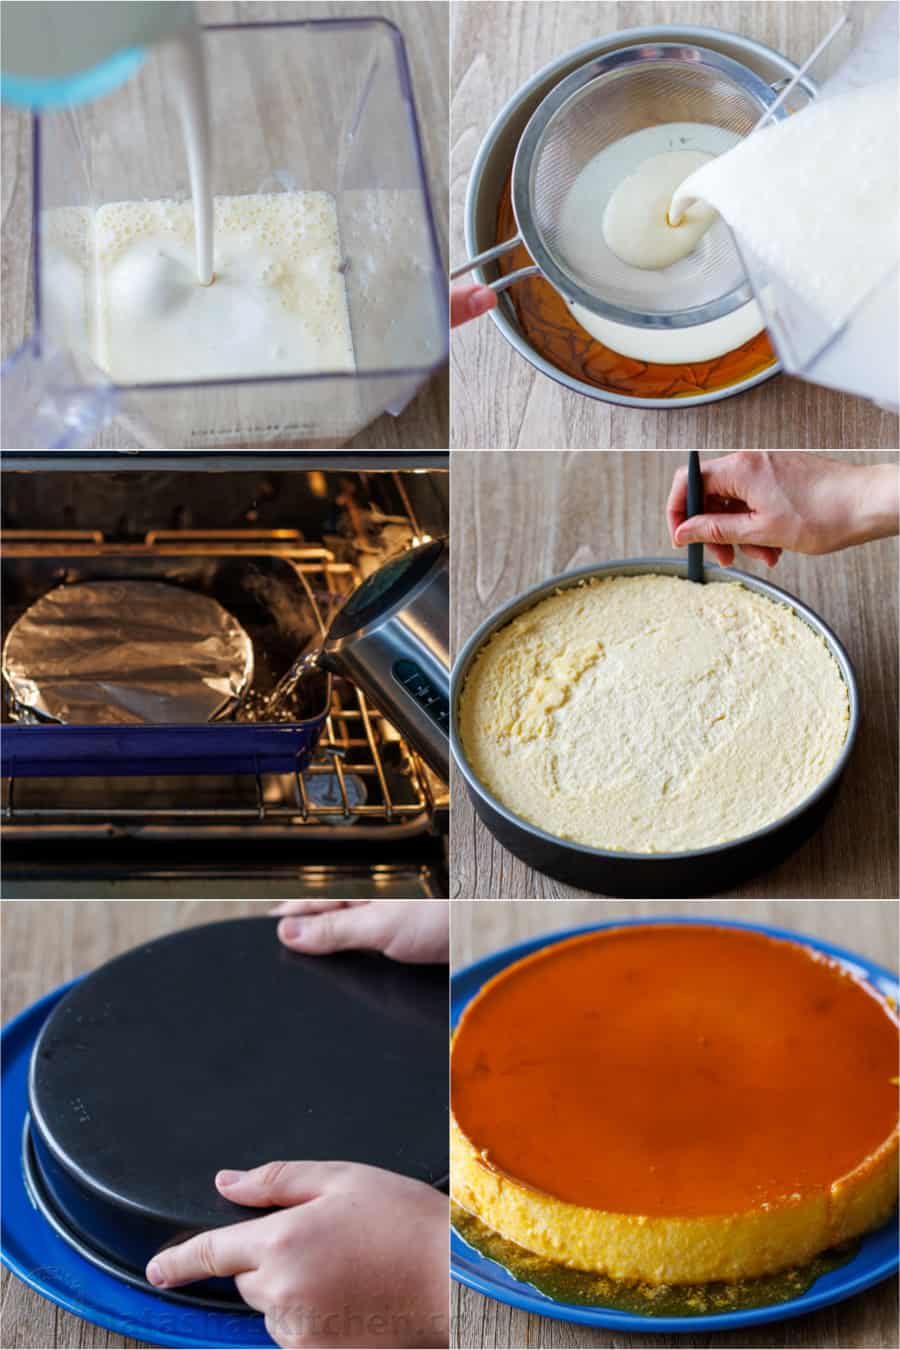 How to bake a flan dessert in a water bath step by step photos